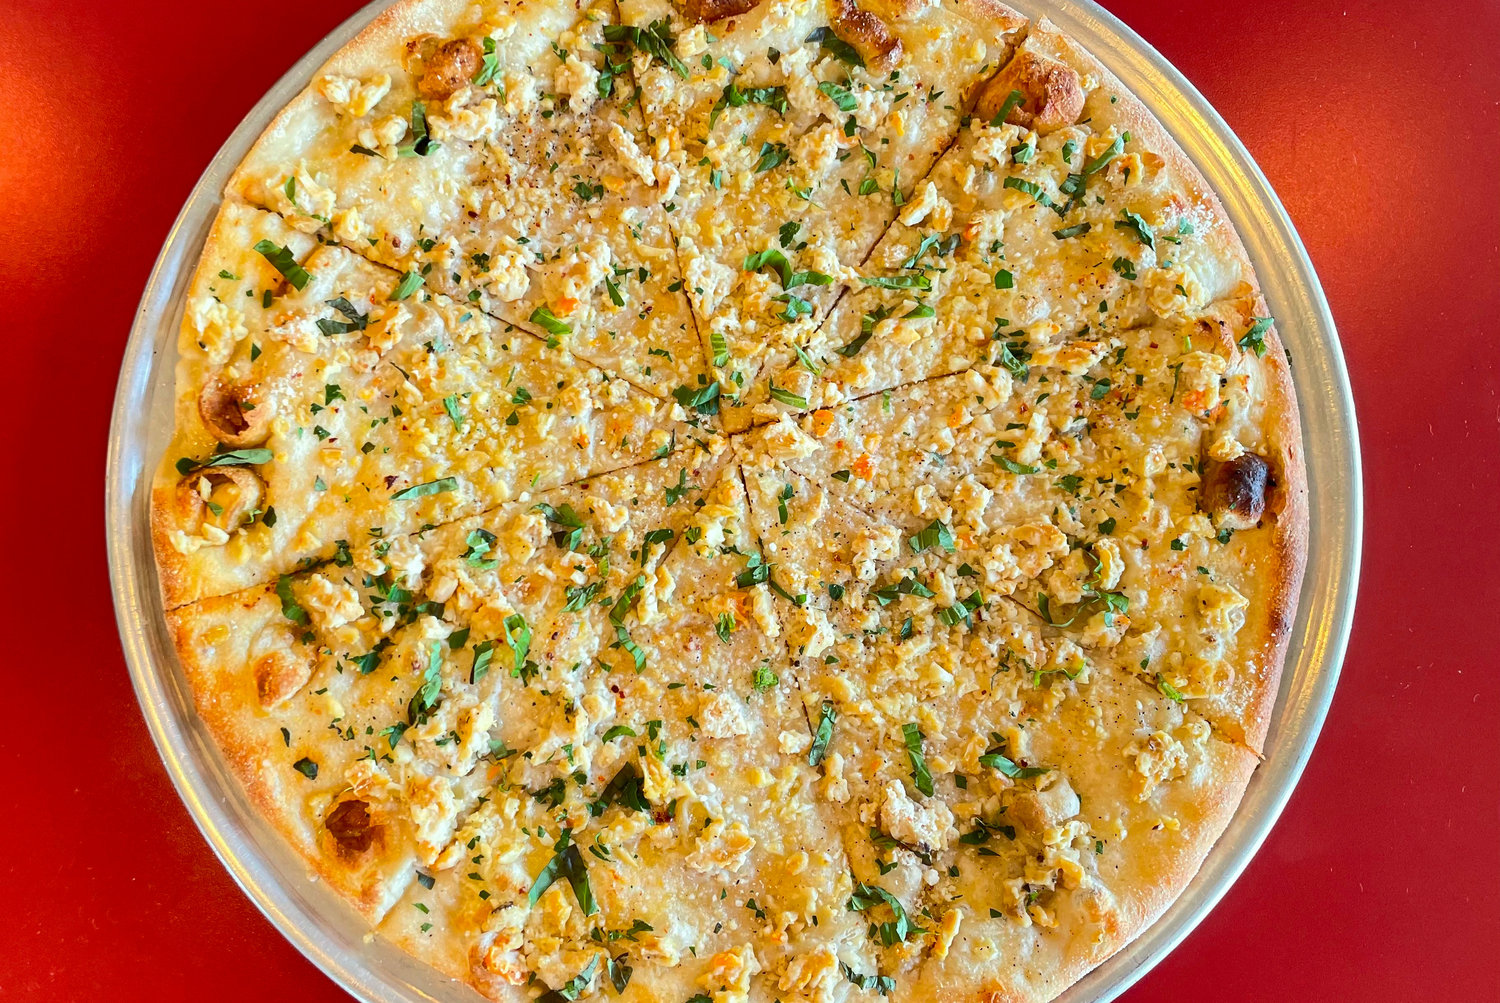 Add a briny clam pizza to your must-list of summer food staples